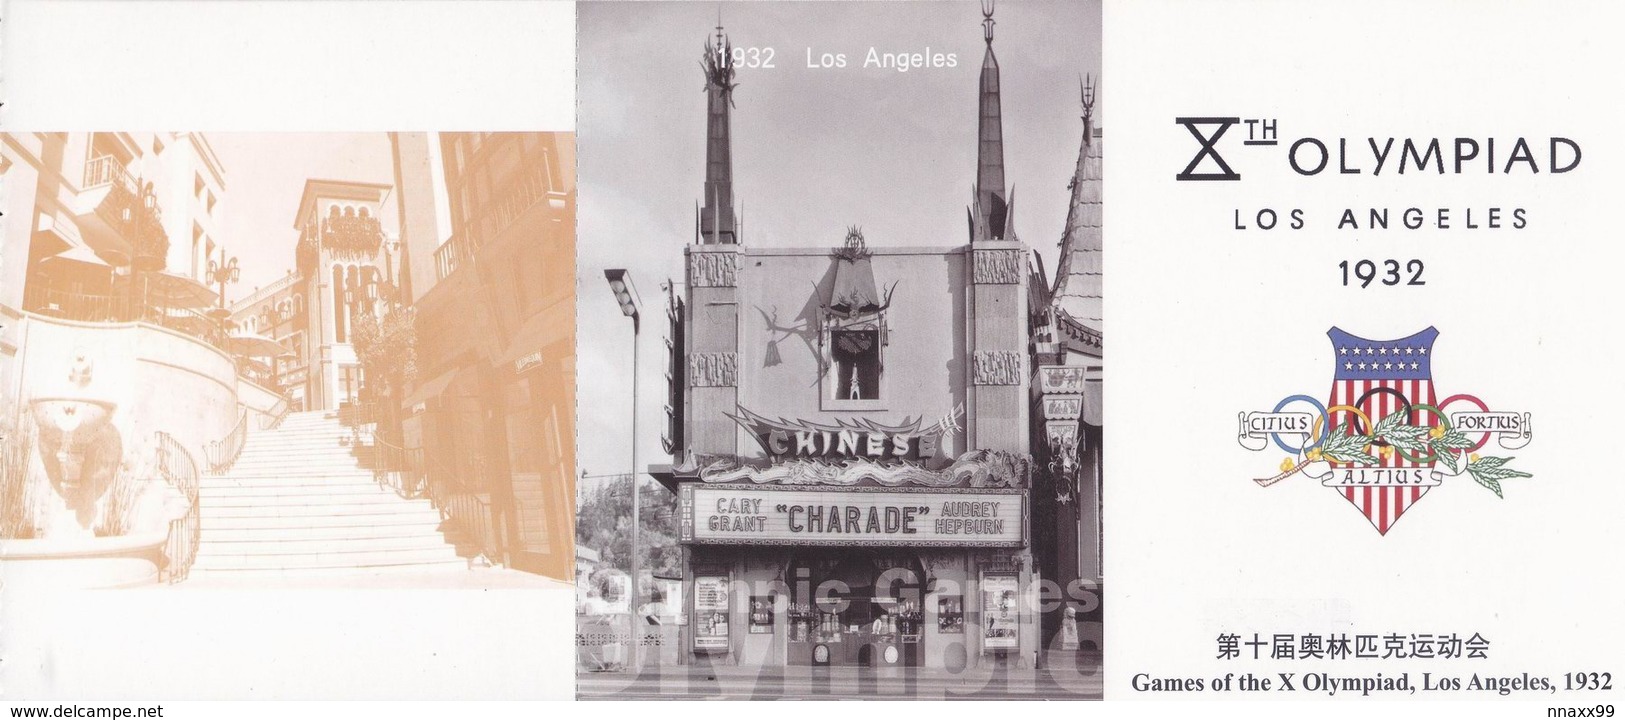 USA - 1932 Los Angeles OG, Grauman's Chinese Theatre & Olympic Logo, W/ Spanish Steps In Rodeo Dr, China's Prepaid Card - Verano 1932: Los Angeles